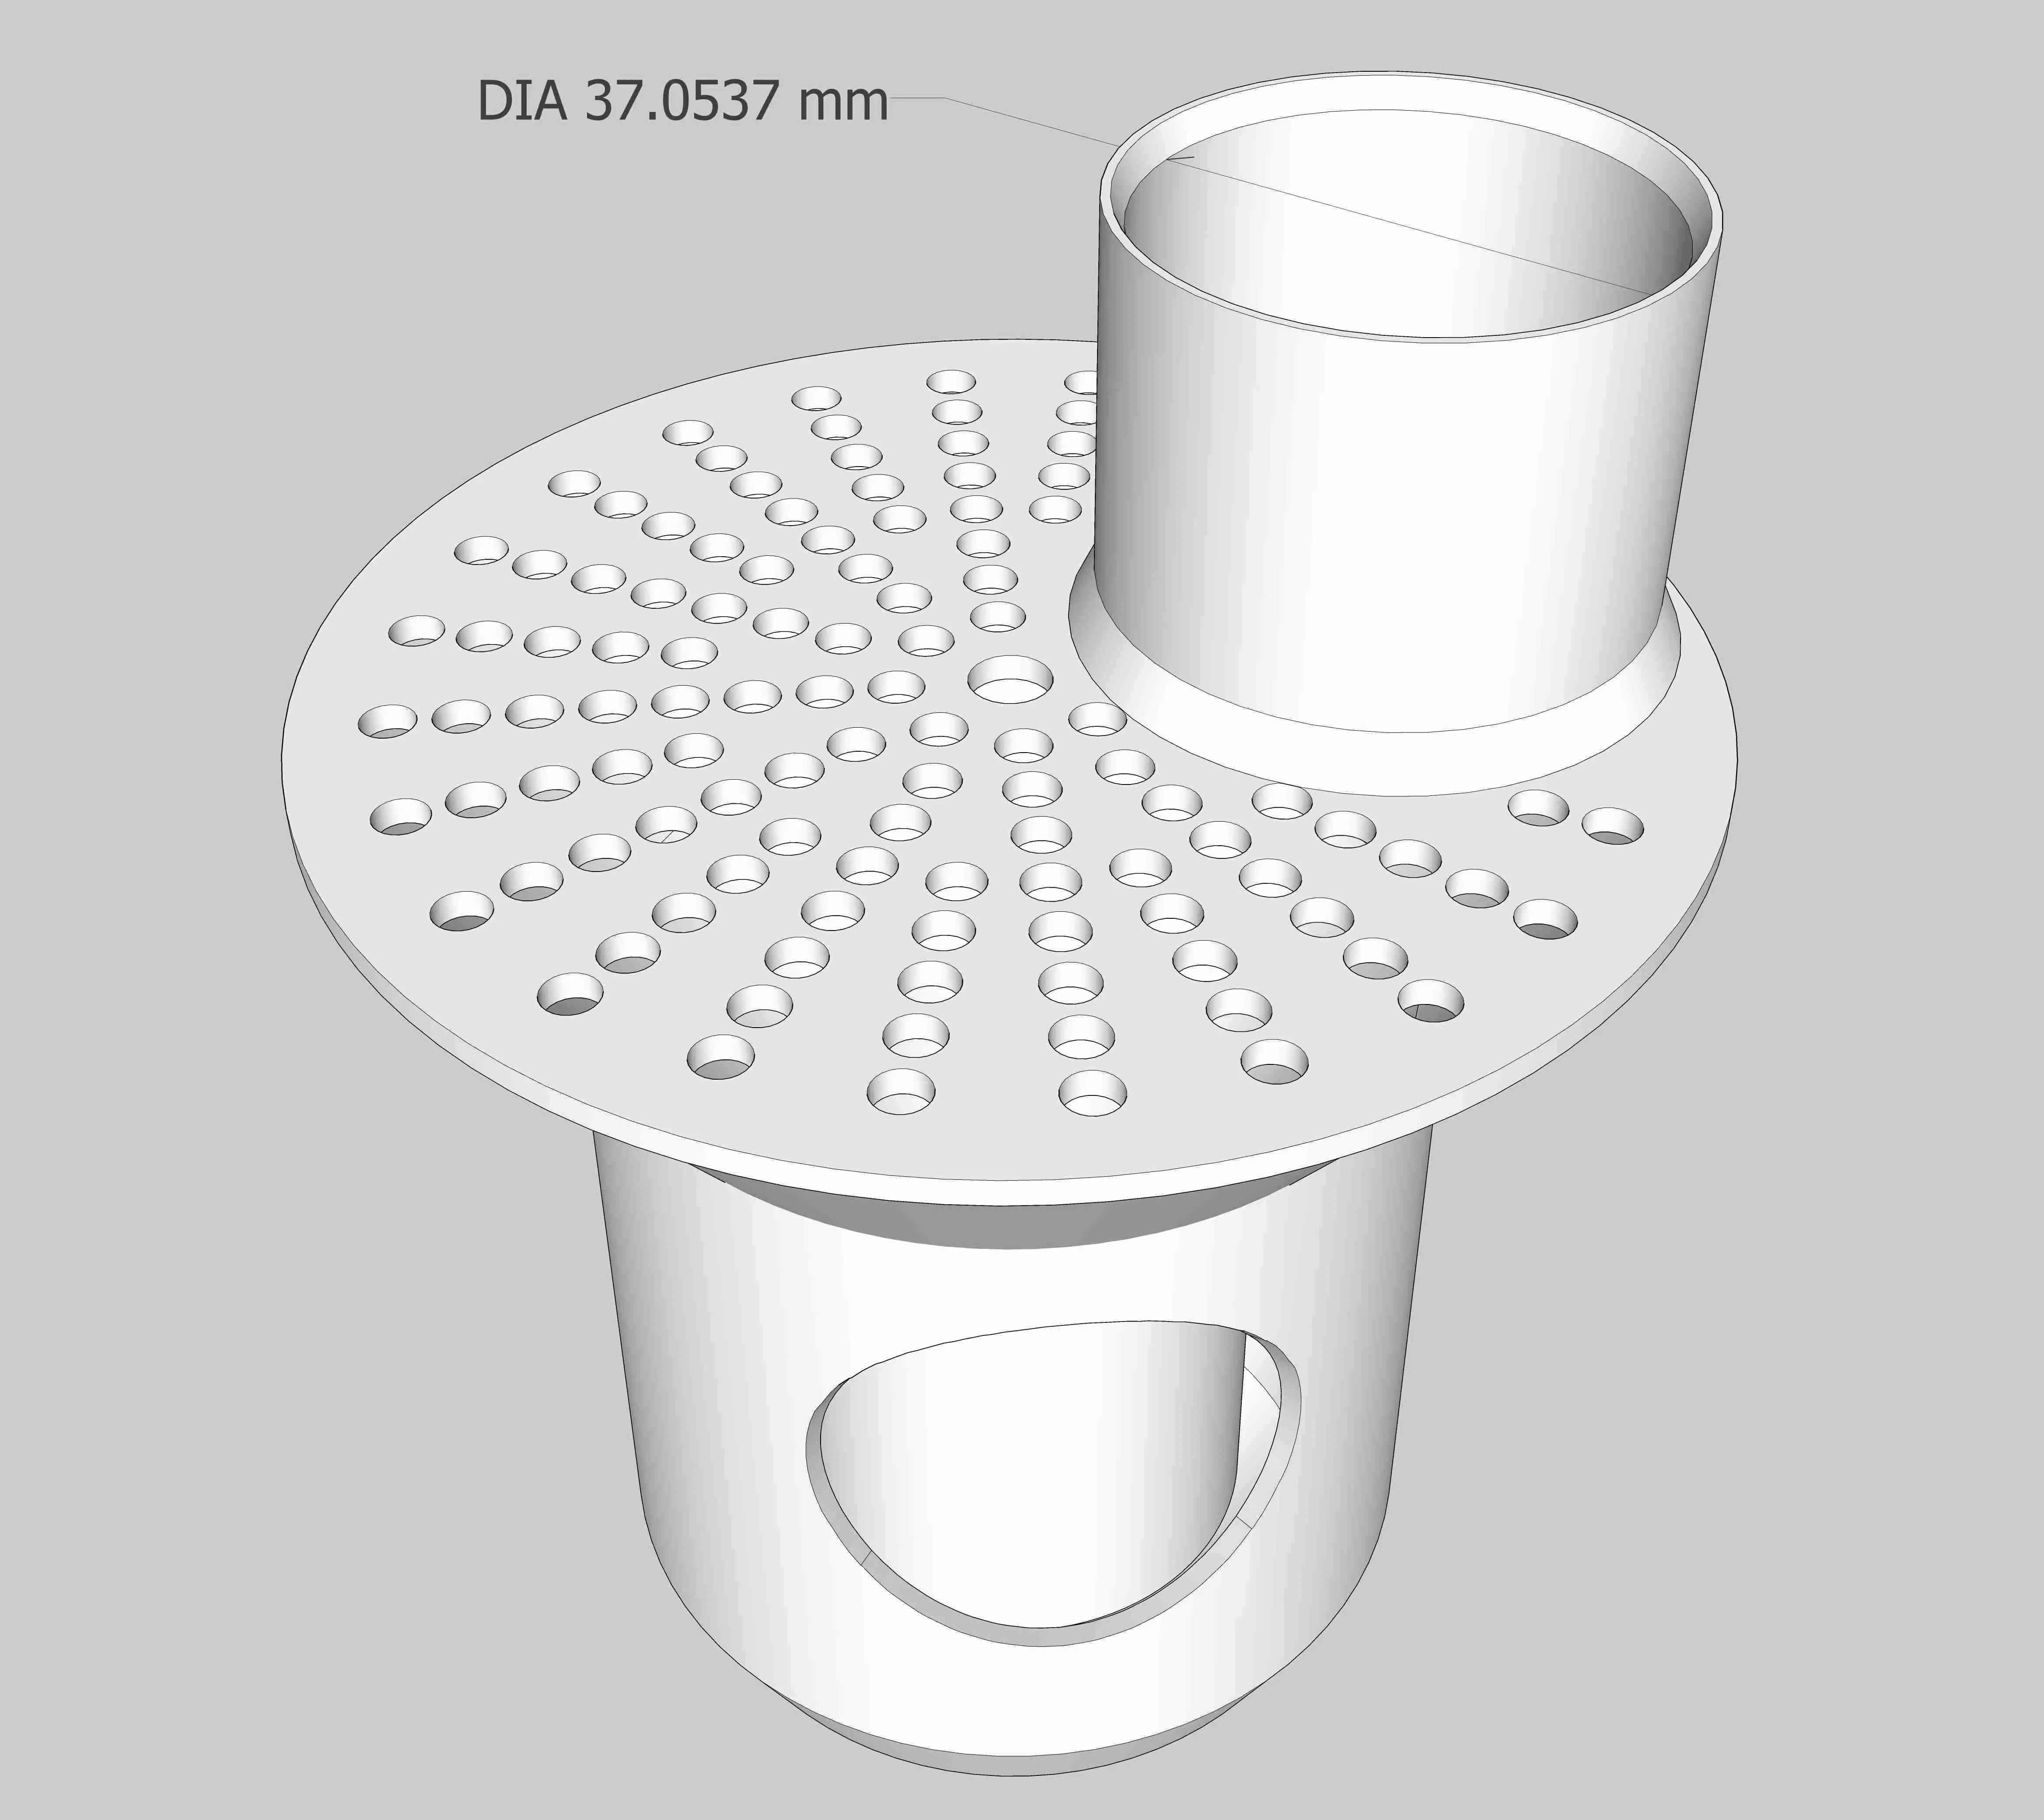 WASTE DRAINS ANTI-ODOR FLOOR DRAIN( NO SUPPORT NEEDED)